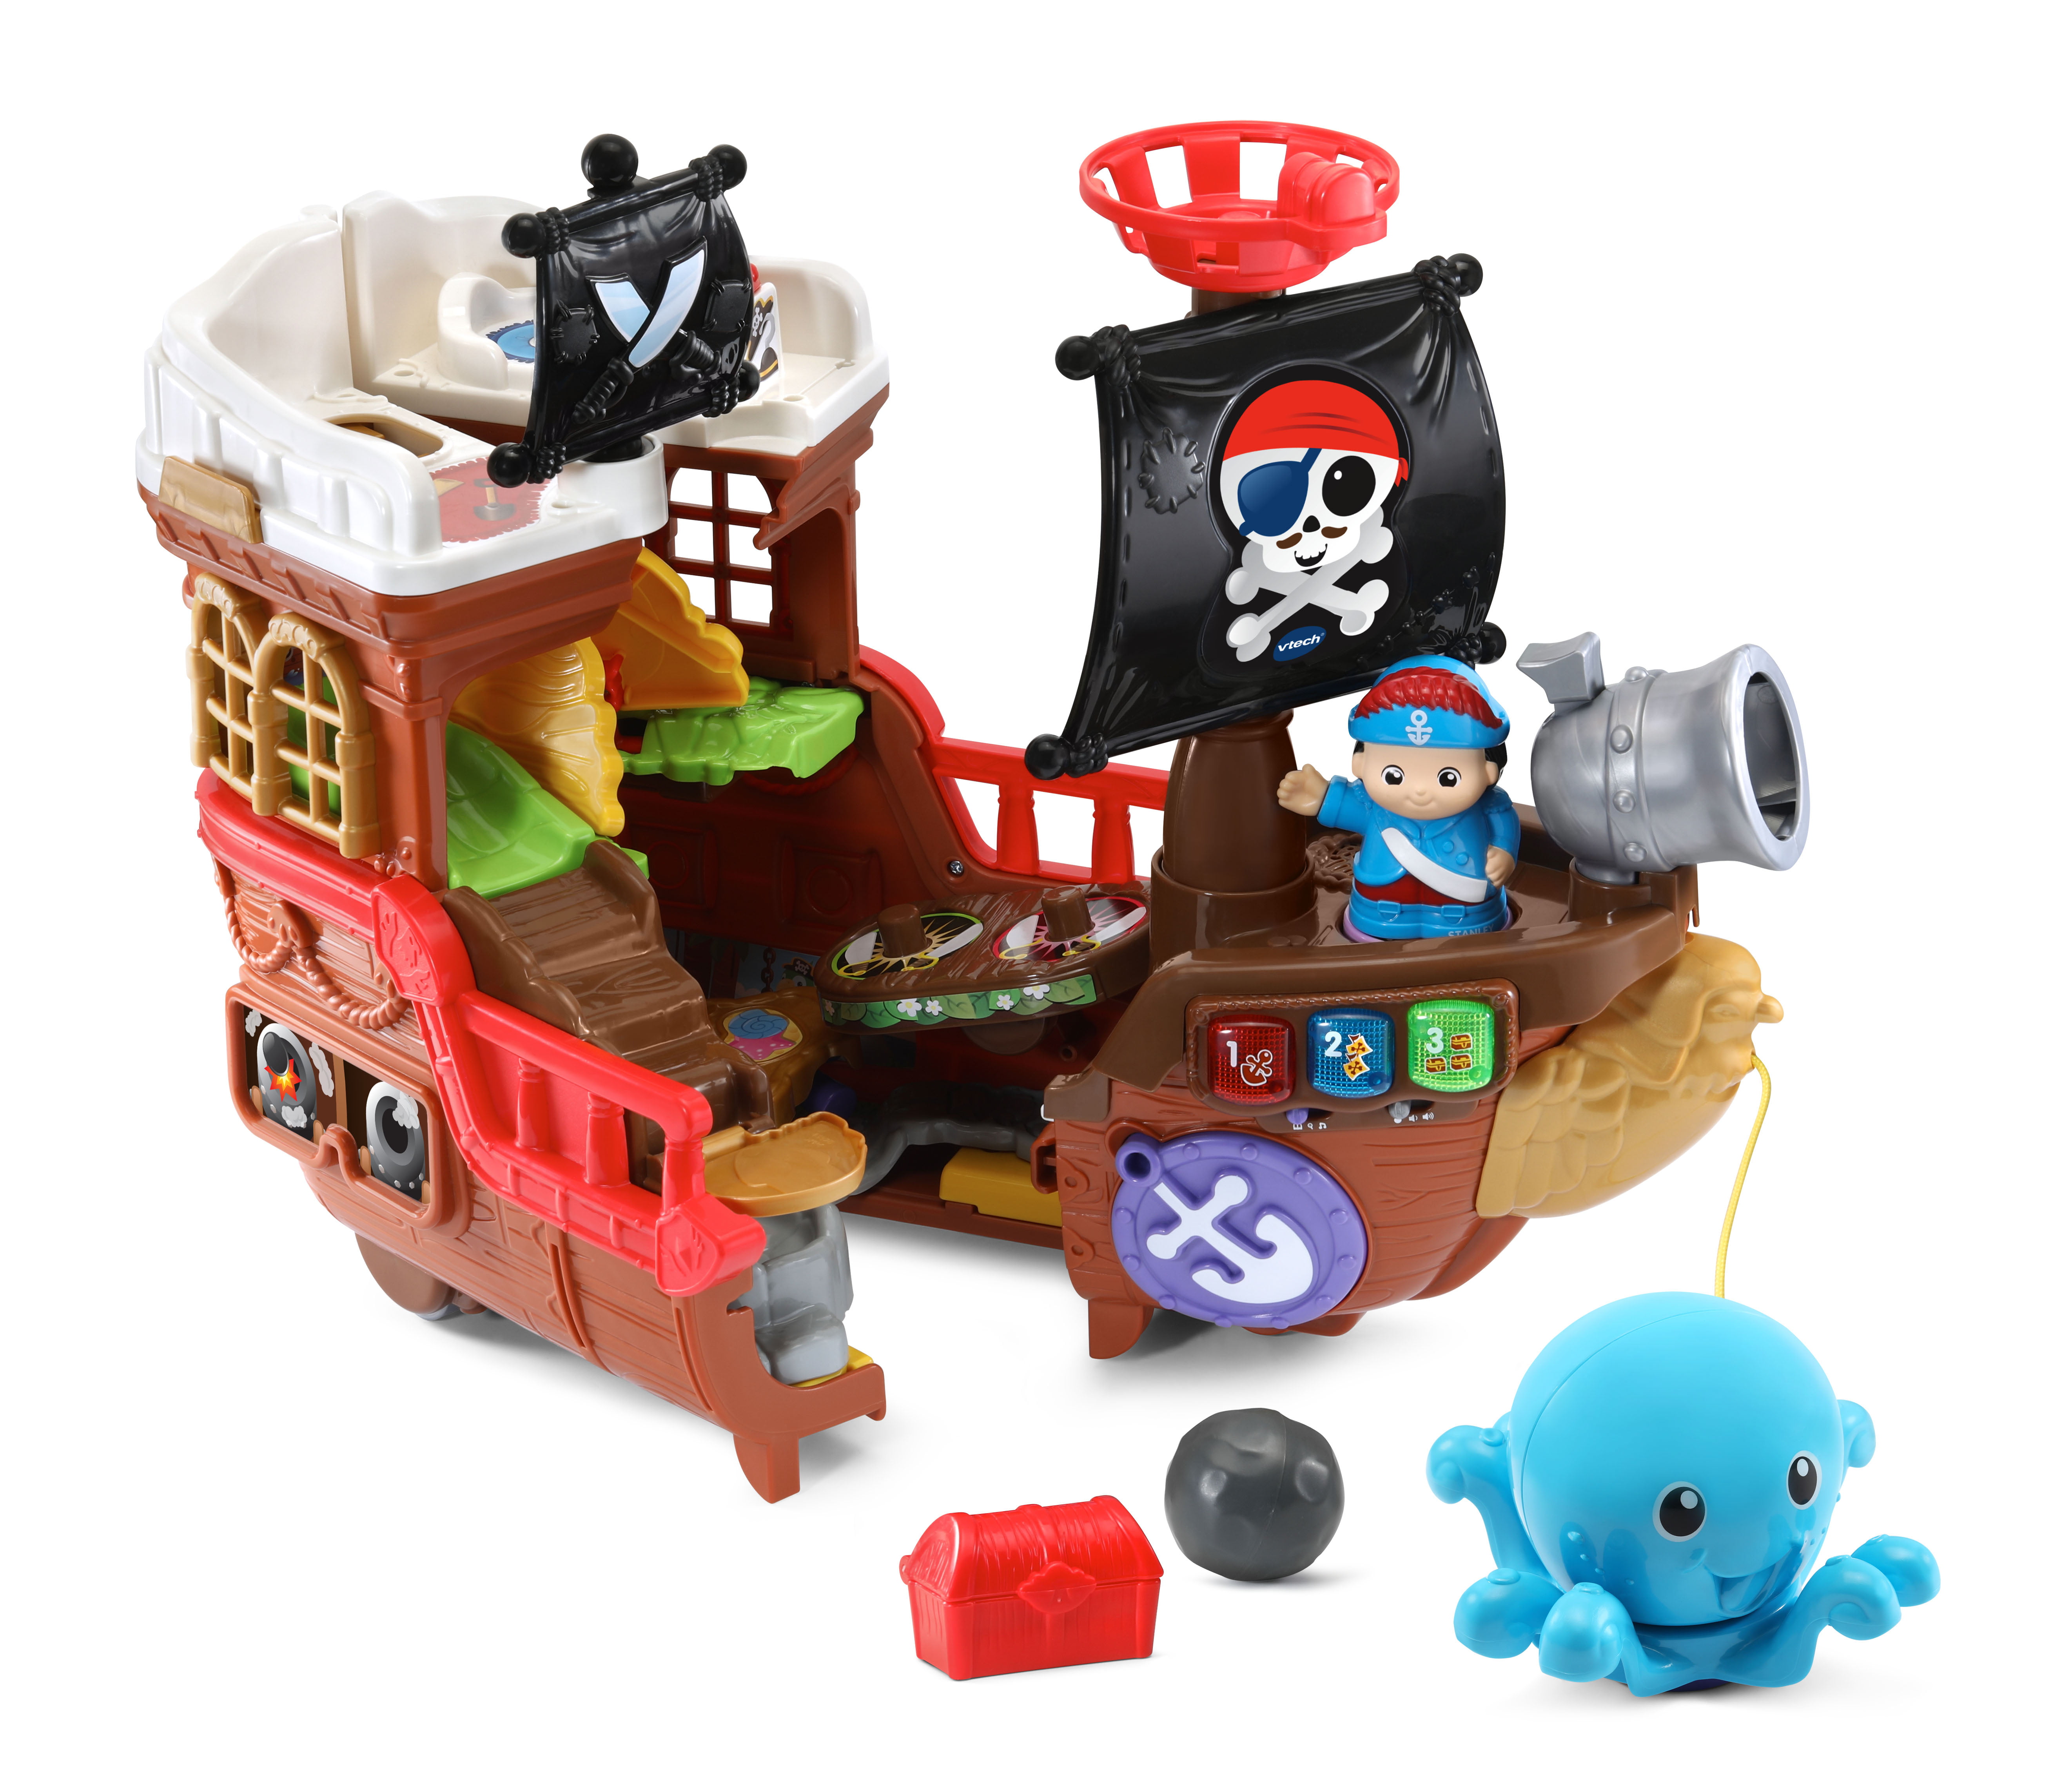 Pirate Ship Vtech Toot-Toot Friends Pirate Ship Activity Set Play Set New Boxed. 